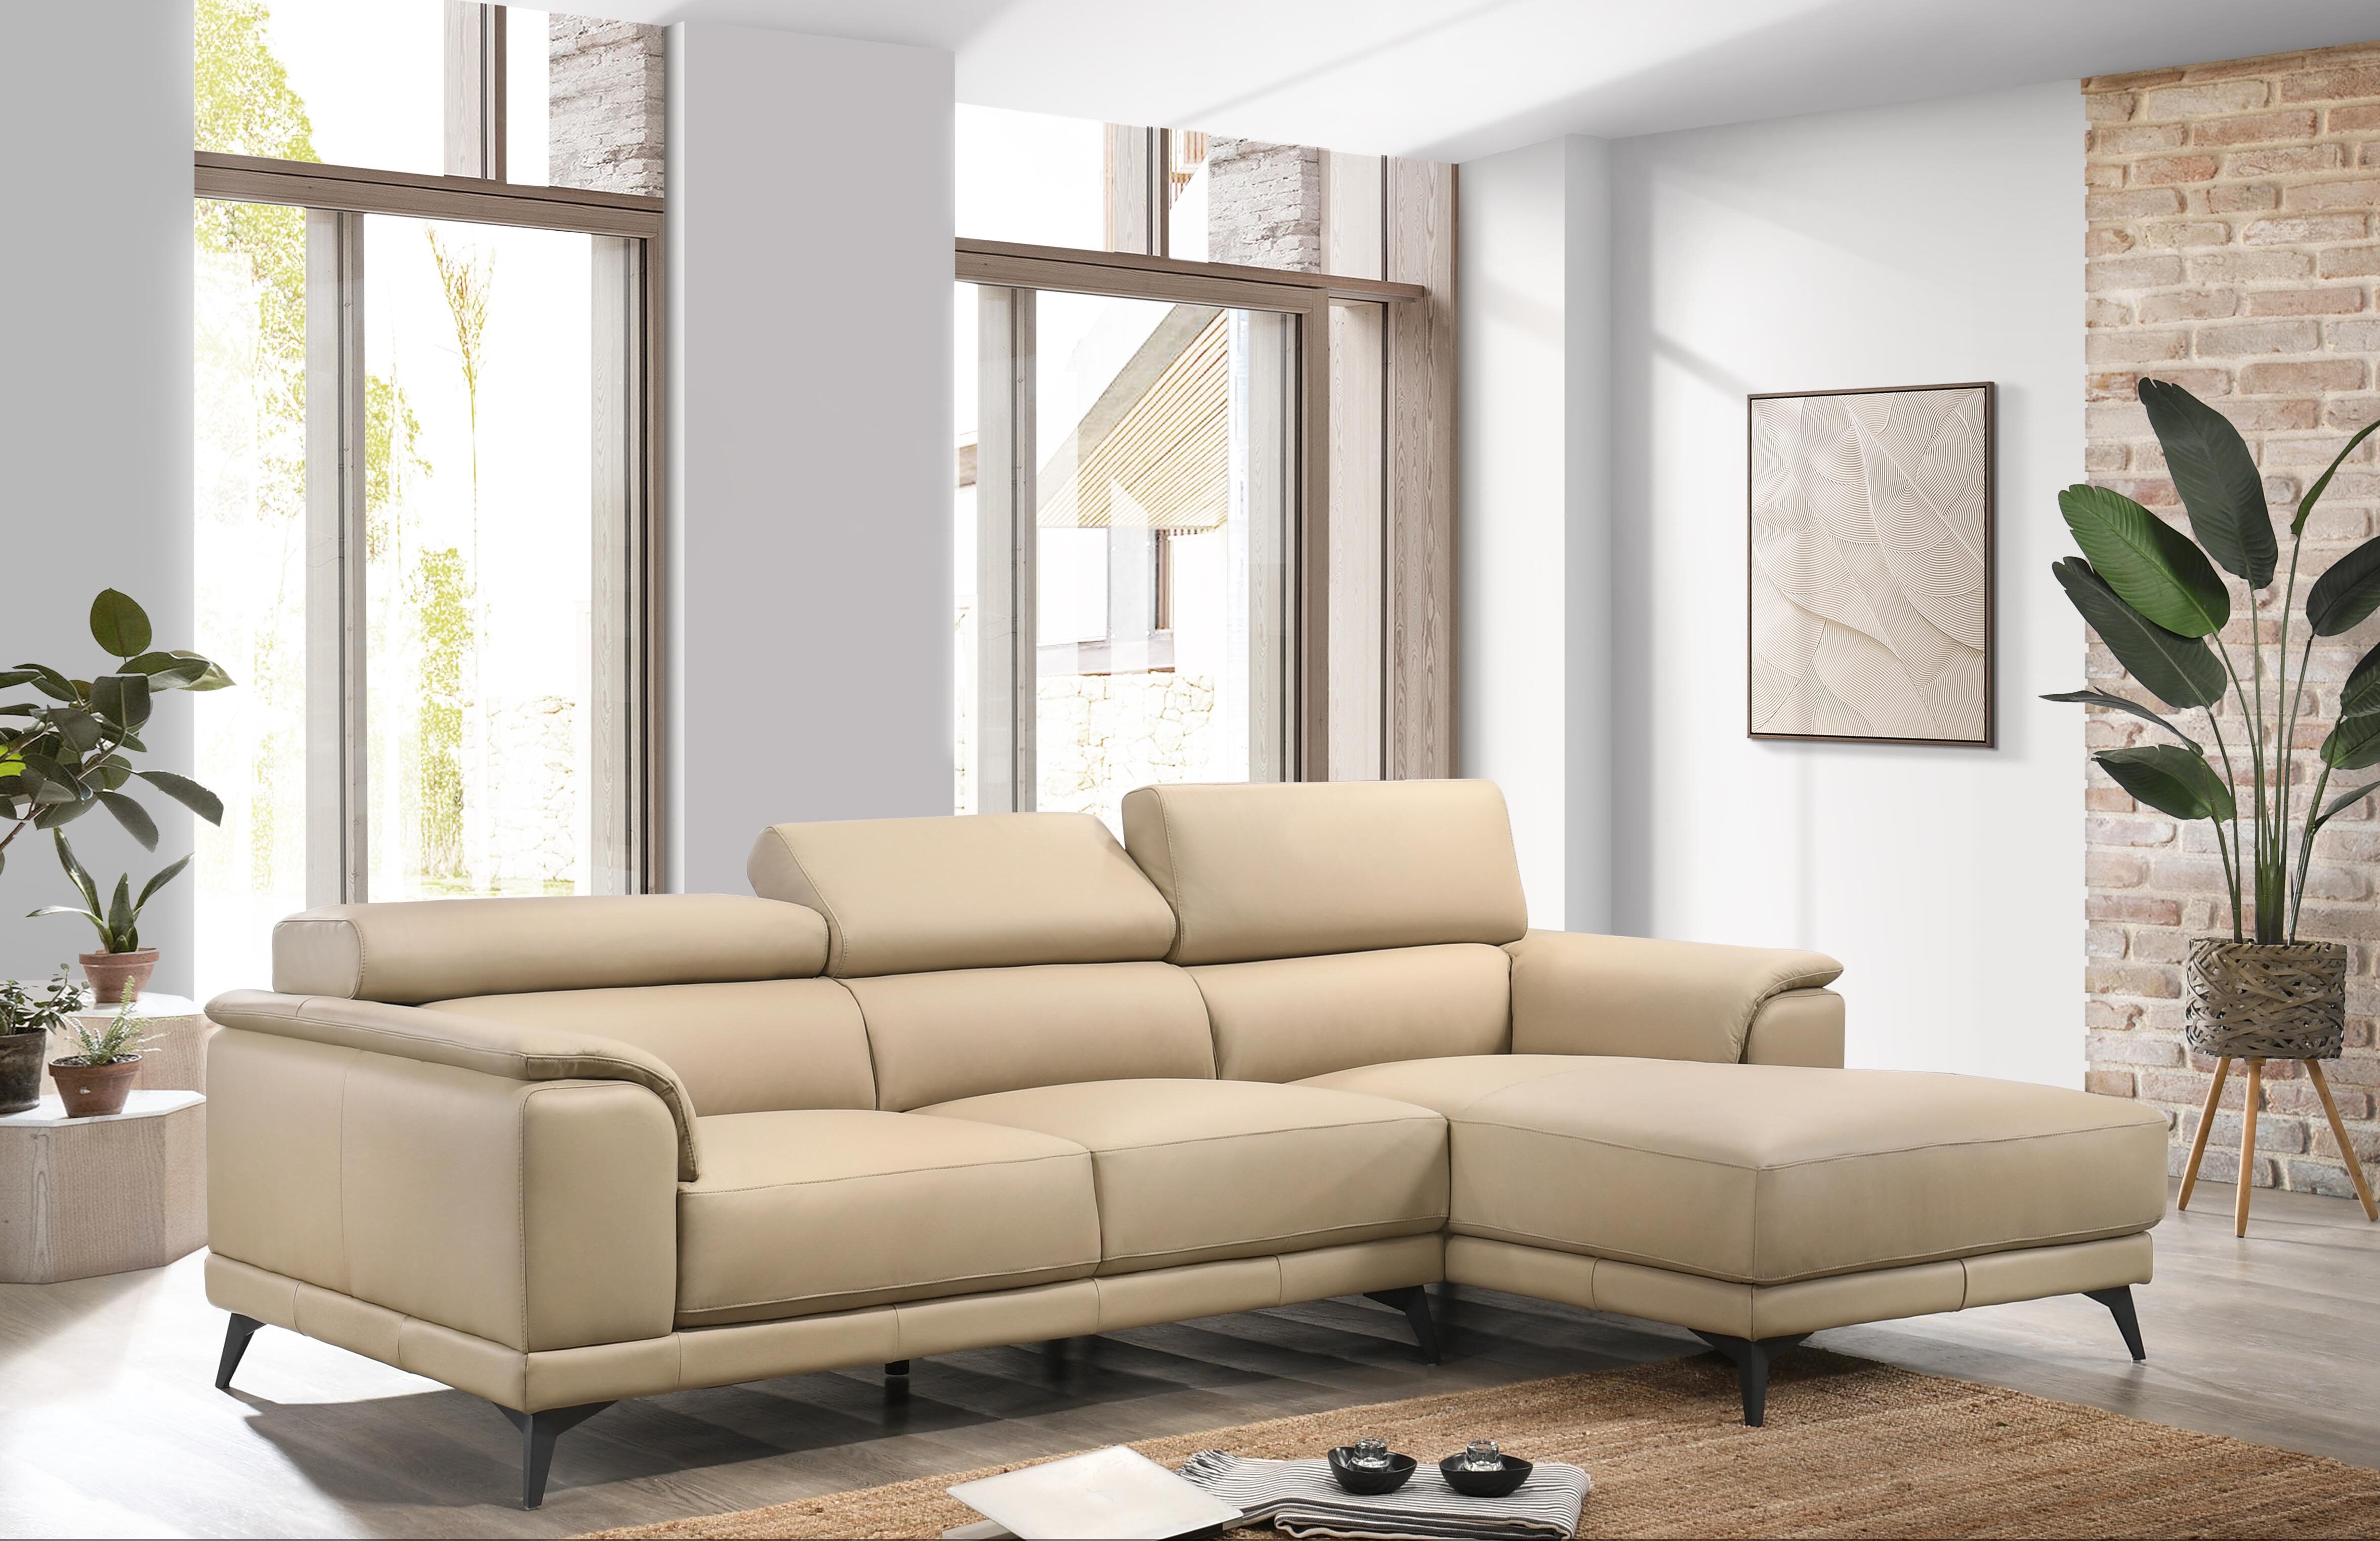 Sofa Settee - the best seller in malaysia